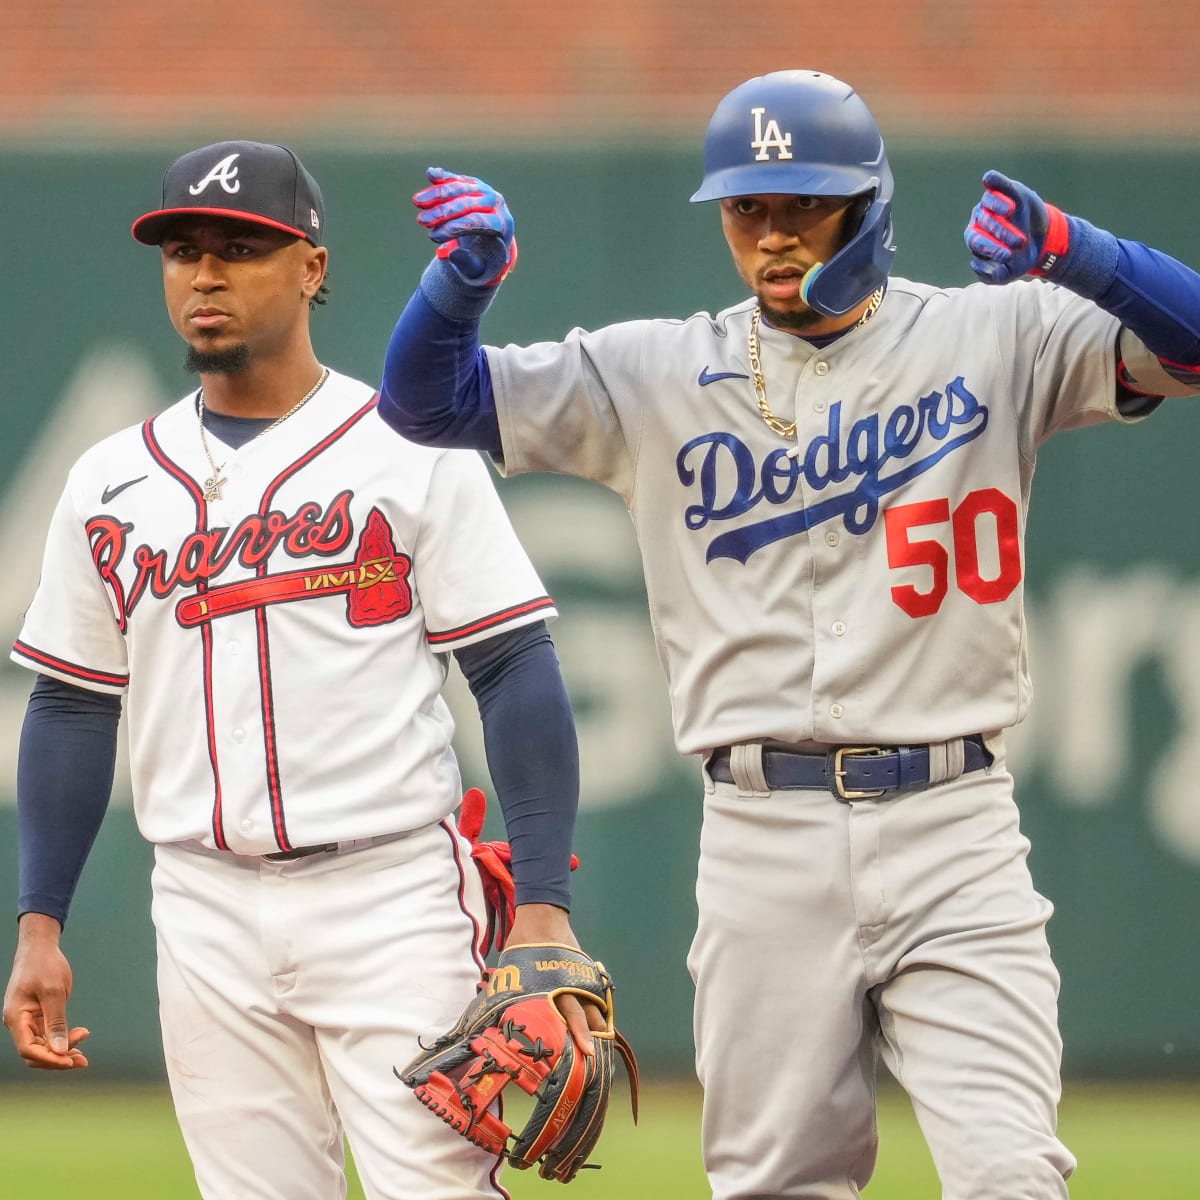 Tony Gonsolin tries to carry Dodgers to sweep of Braves